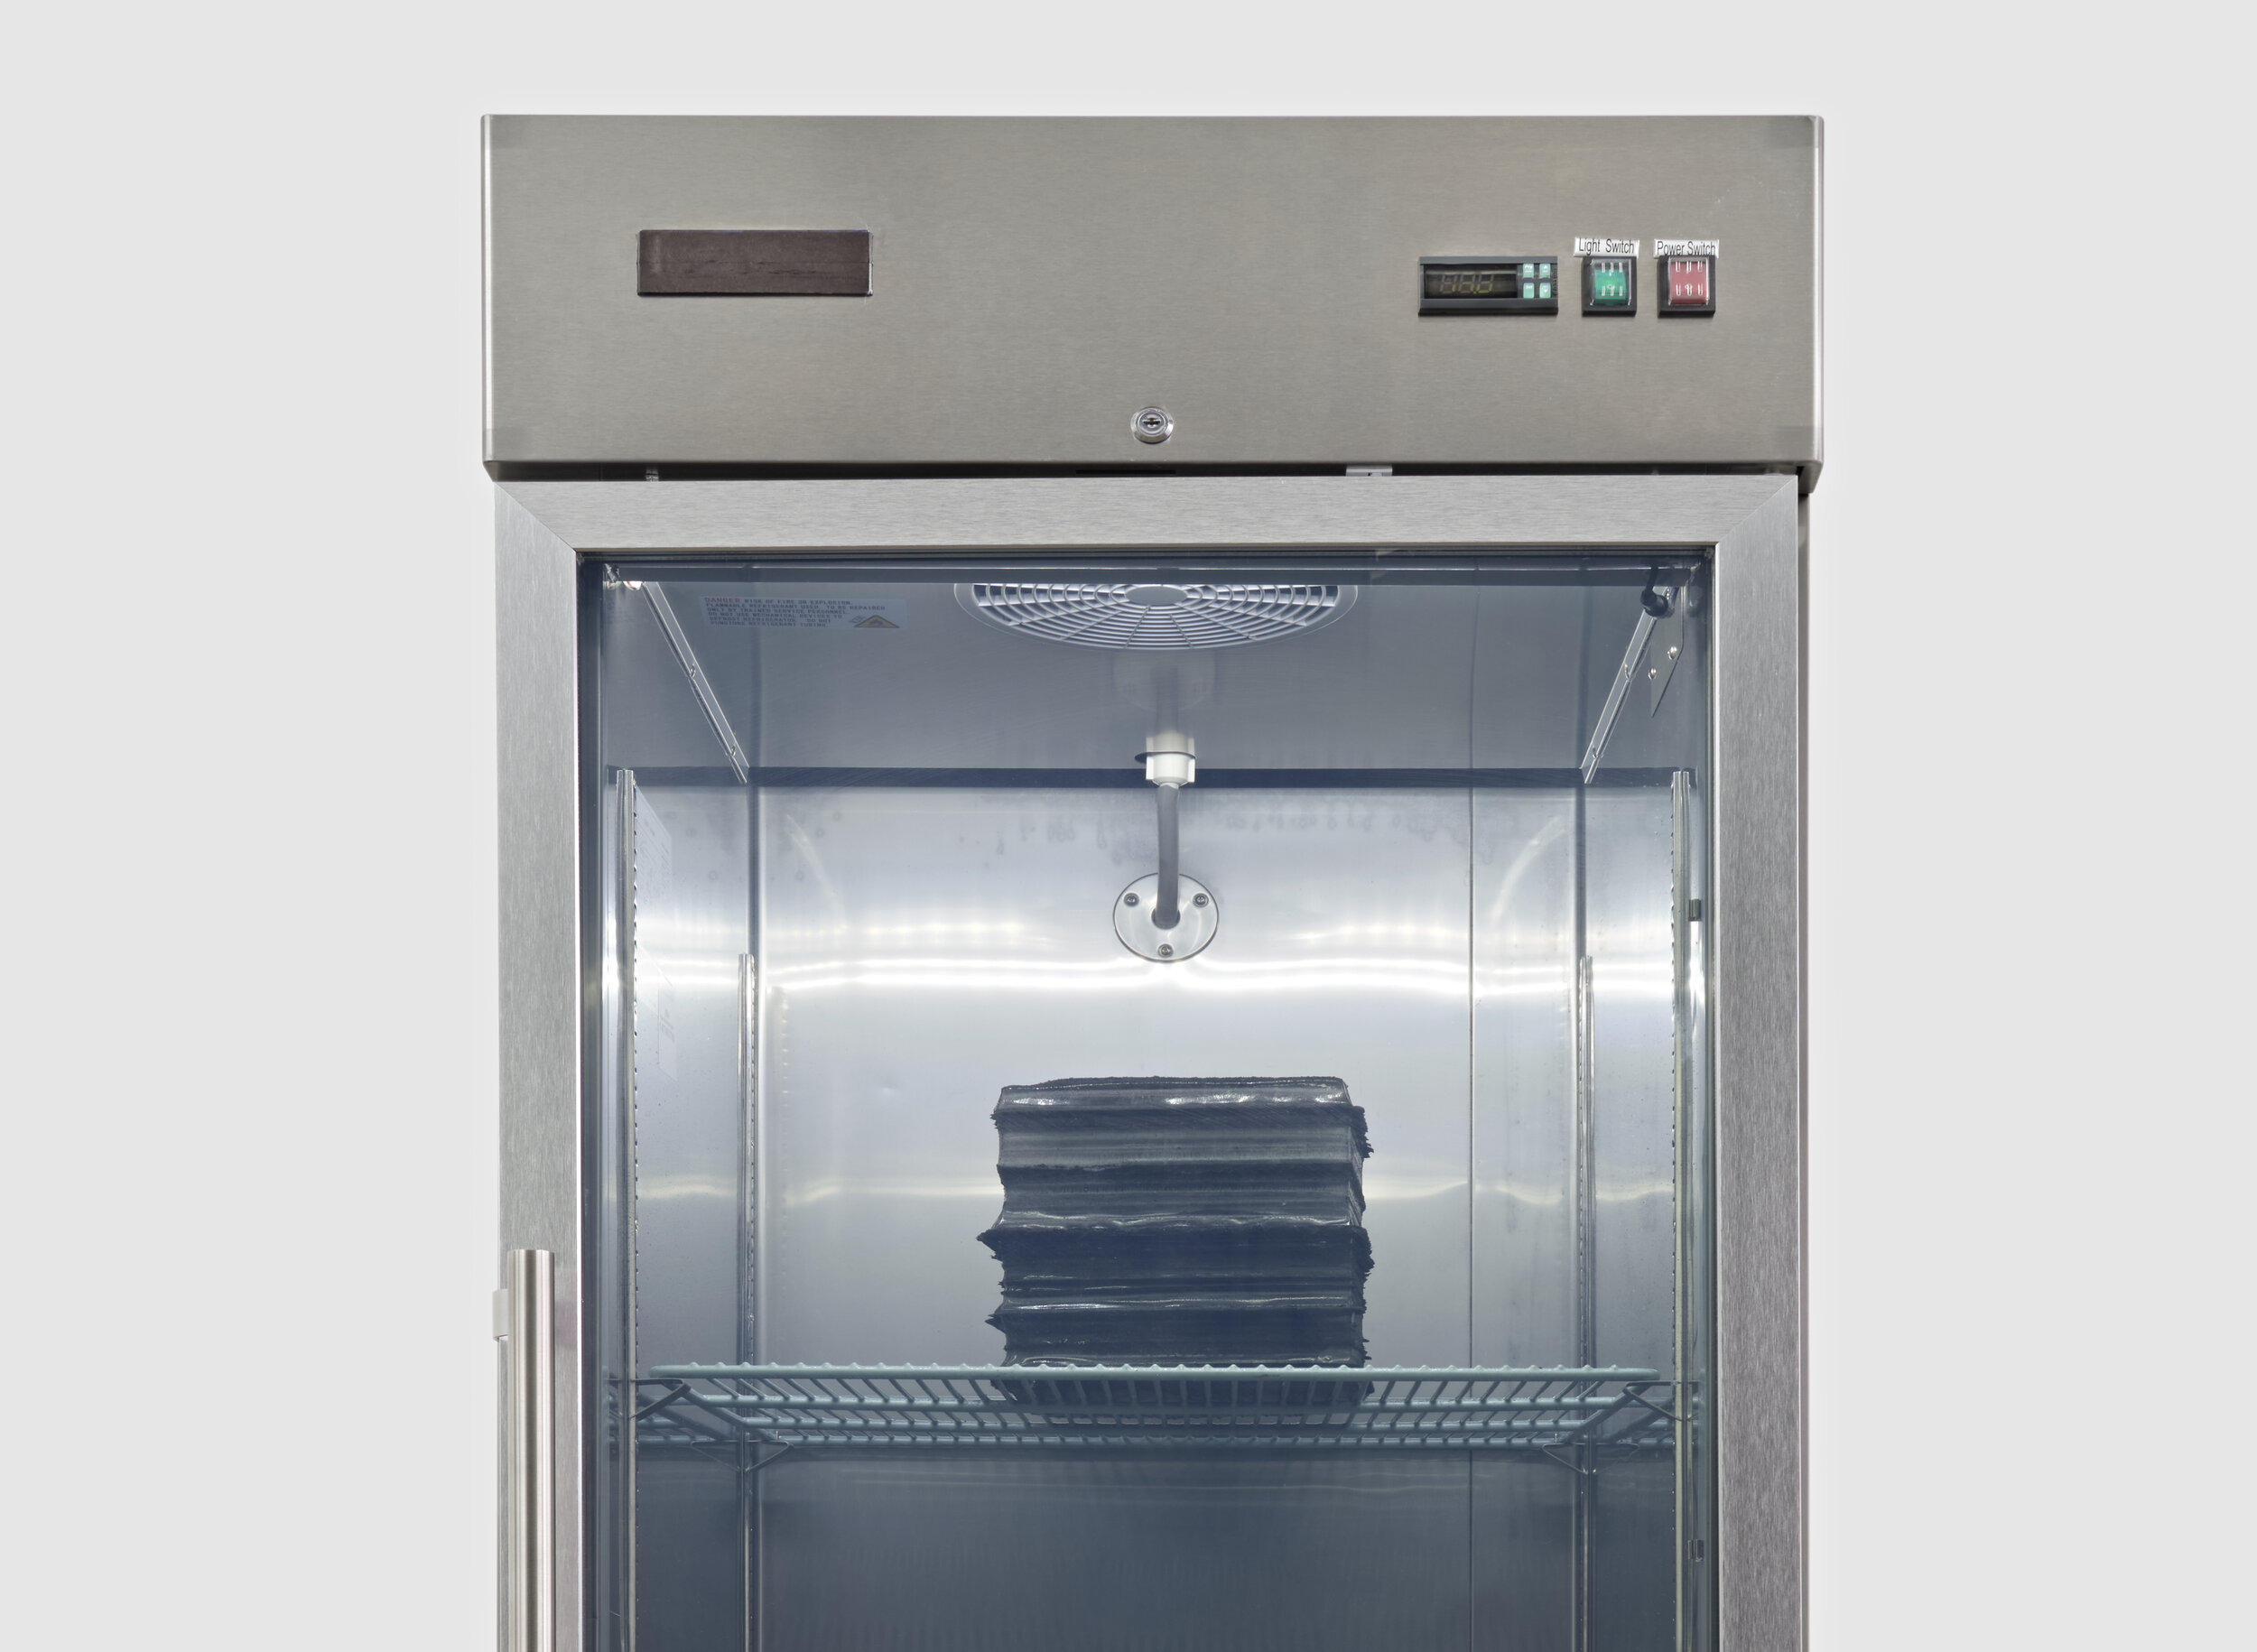  Sae Jun Kim  Solicitude in stratum’s loss , 2021 commercial freezer, water, carbon sediment  82 x 29 x 34 inches (208 x 74 x 86 cm) 